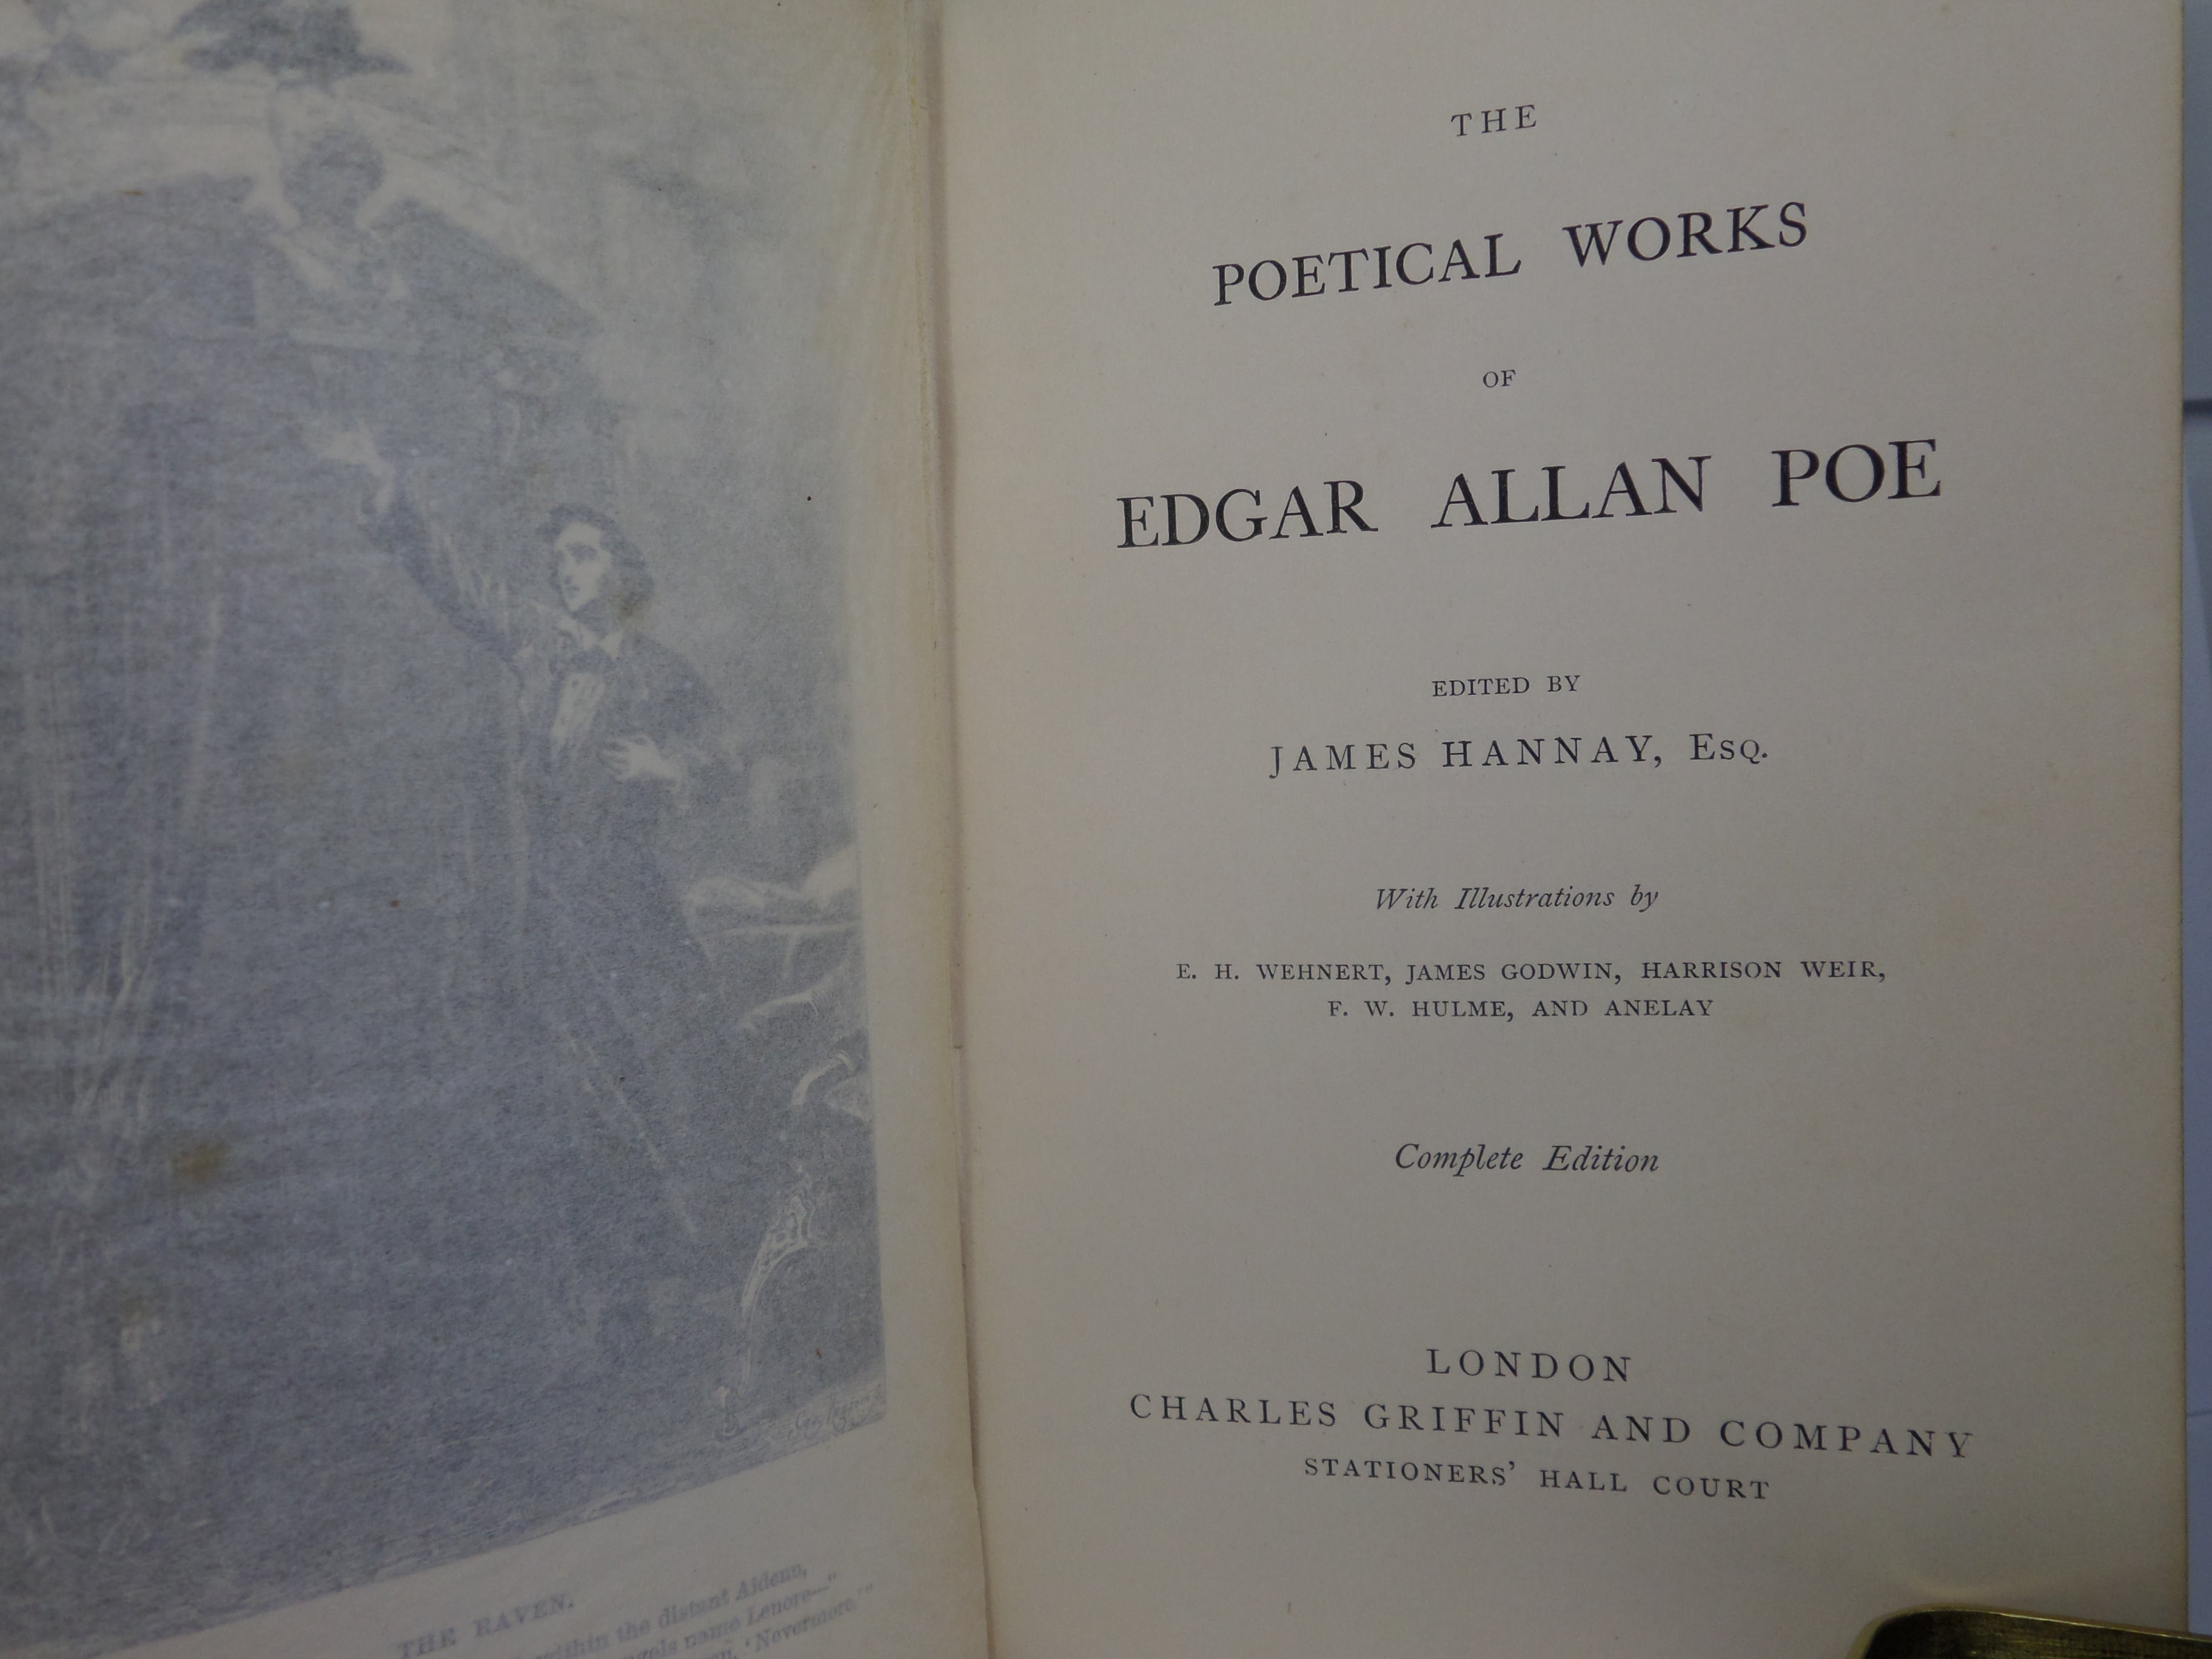 THE POETICAL WORKS OF EDGAR ALLAN POE 1852 COMPLETE EDITION ILLUSTRATED